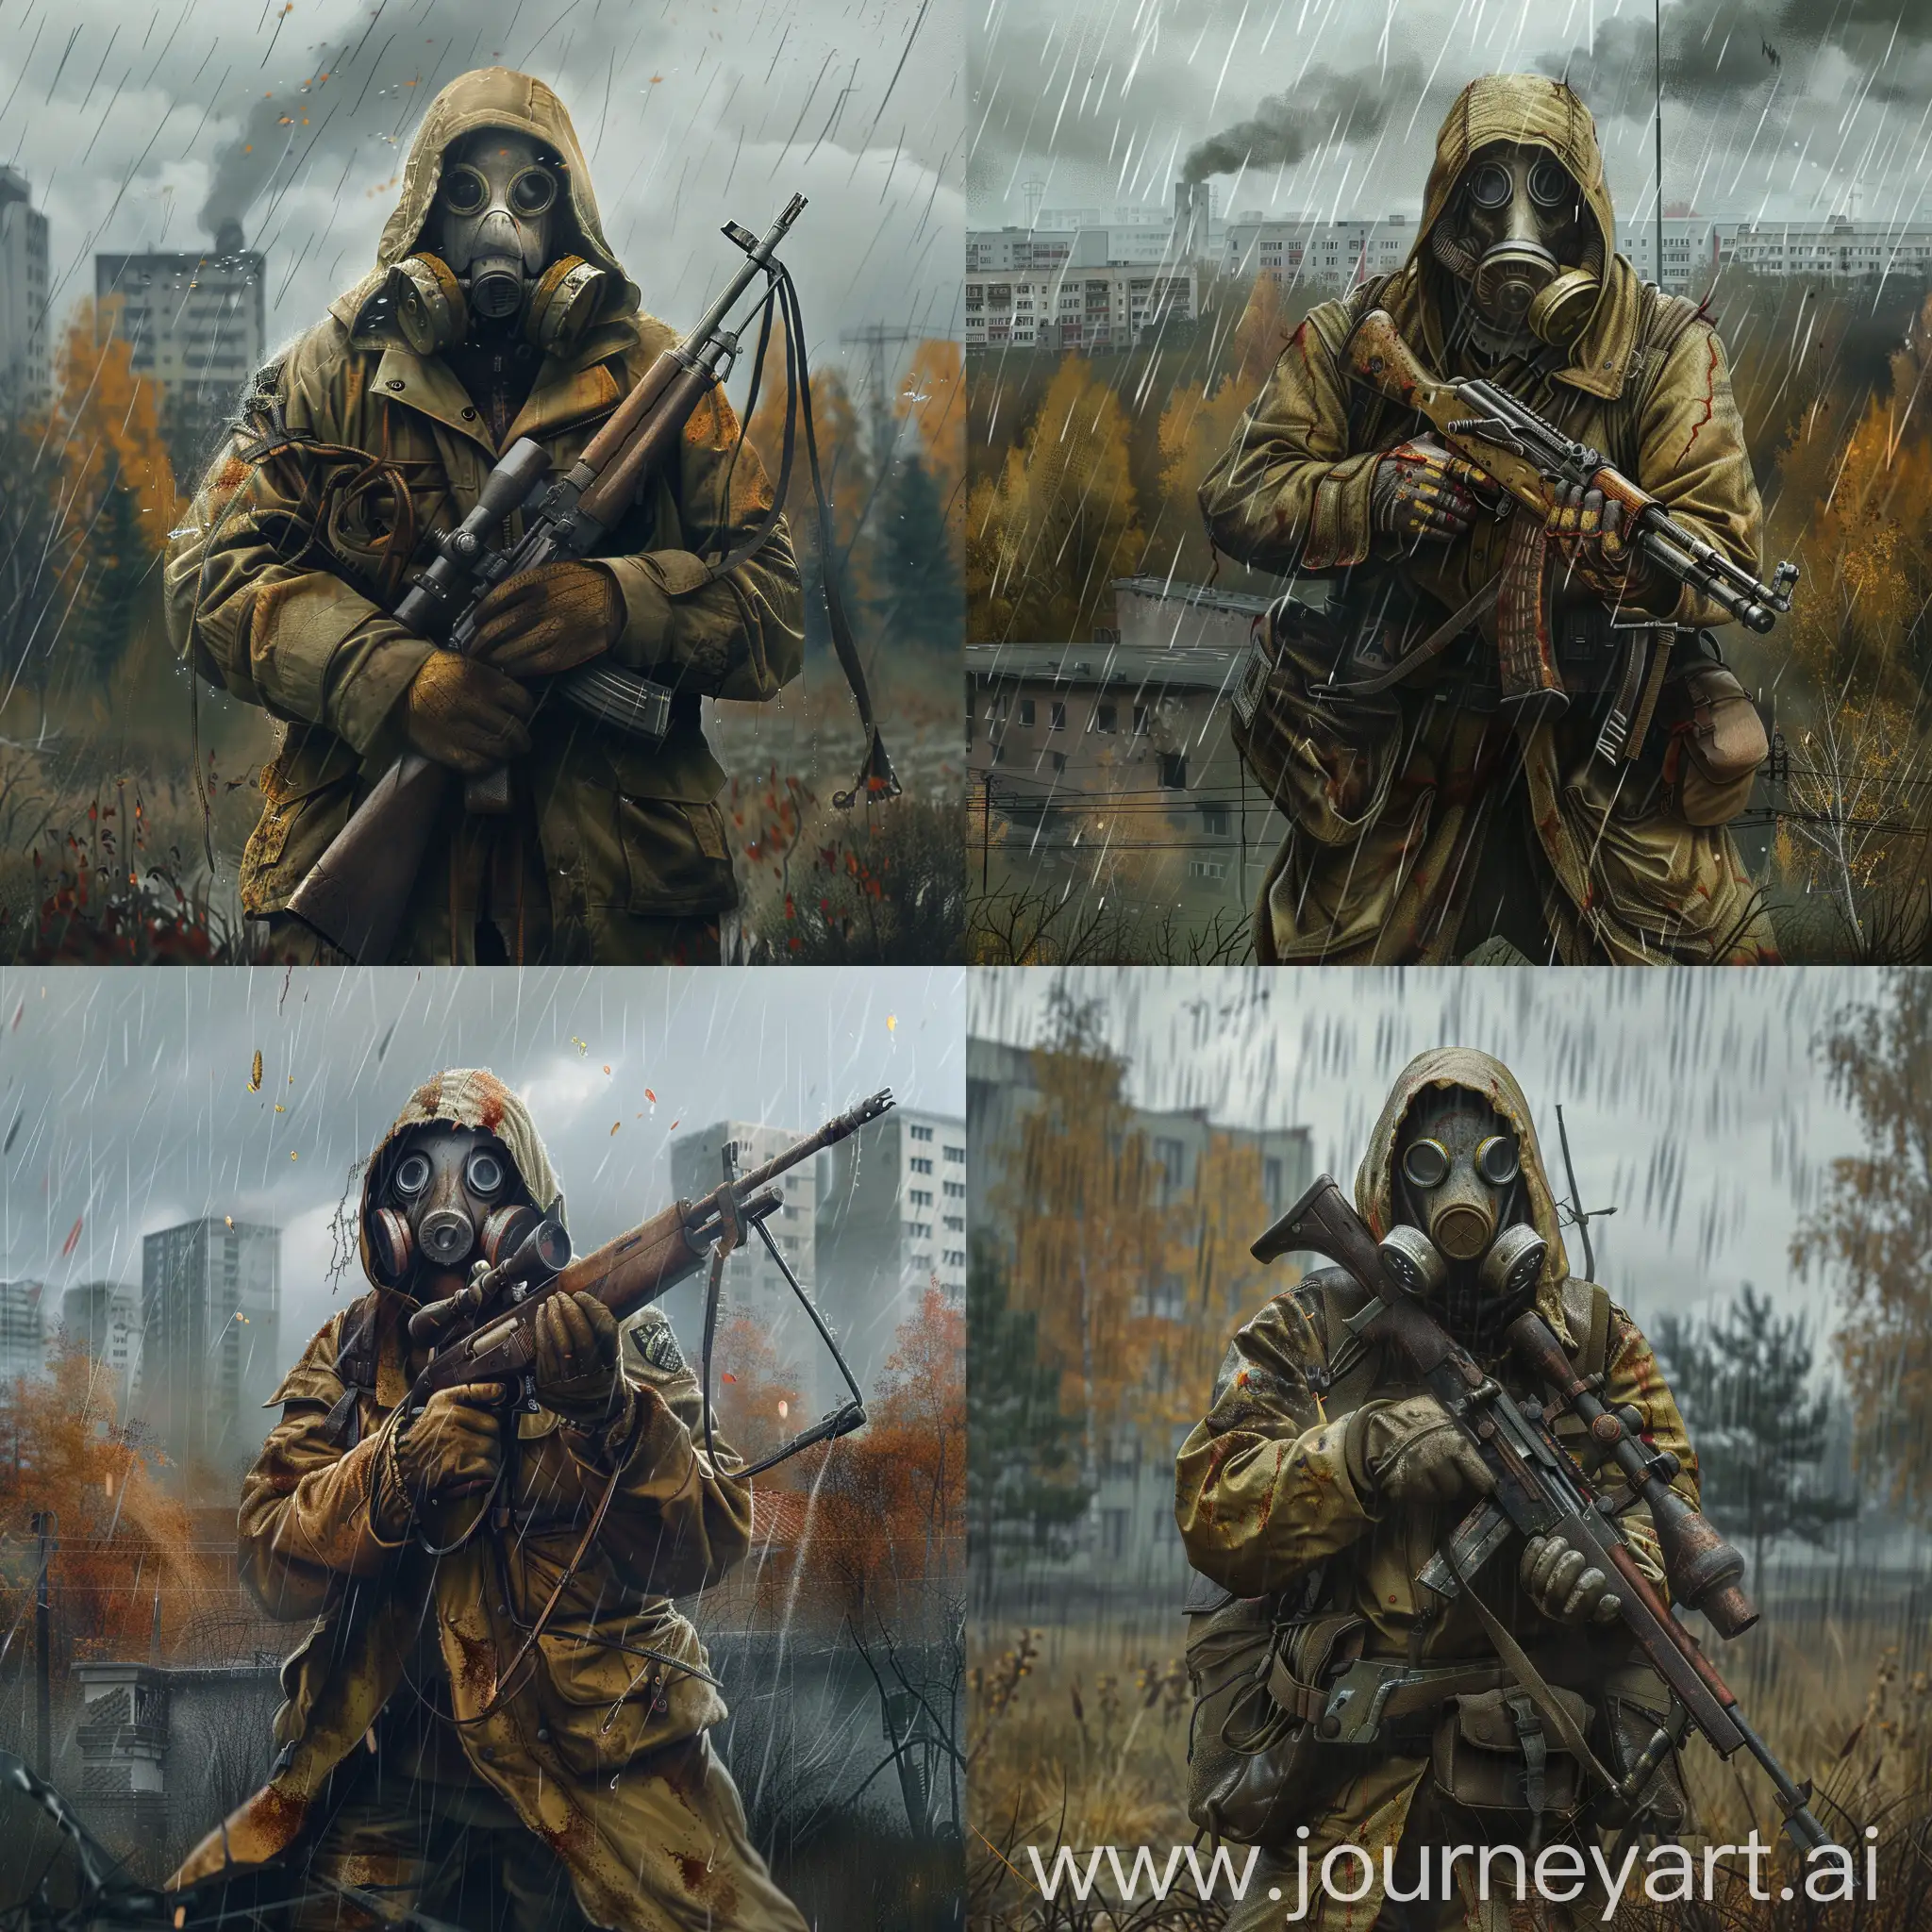  art a loner stalker from the universe of S.T.A.L.K.E.R., gasmask, sniper rifle in hands, radiation rain, abandoned soviet city Pripyat, gloomy autumn.